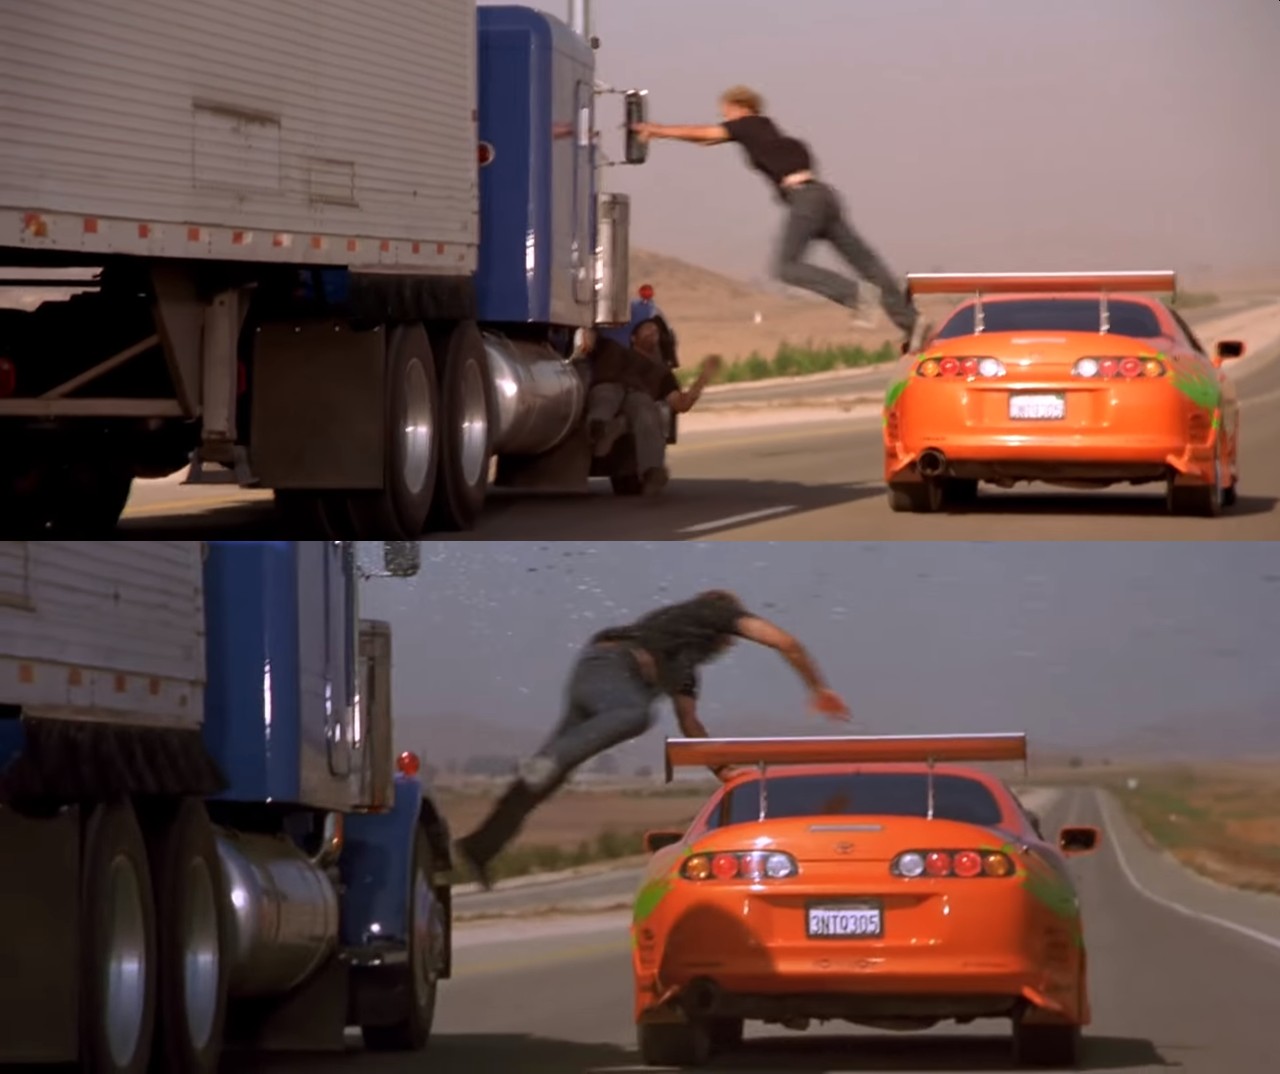 High Quality Truck Fast and Furious Blank Meme Template